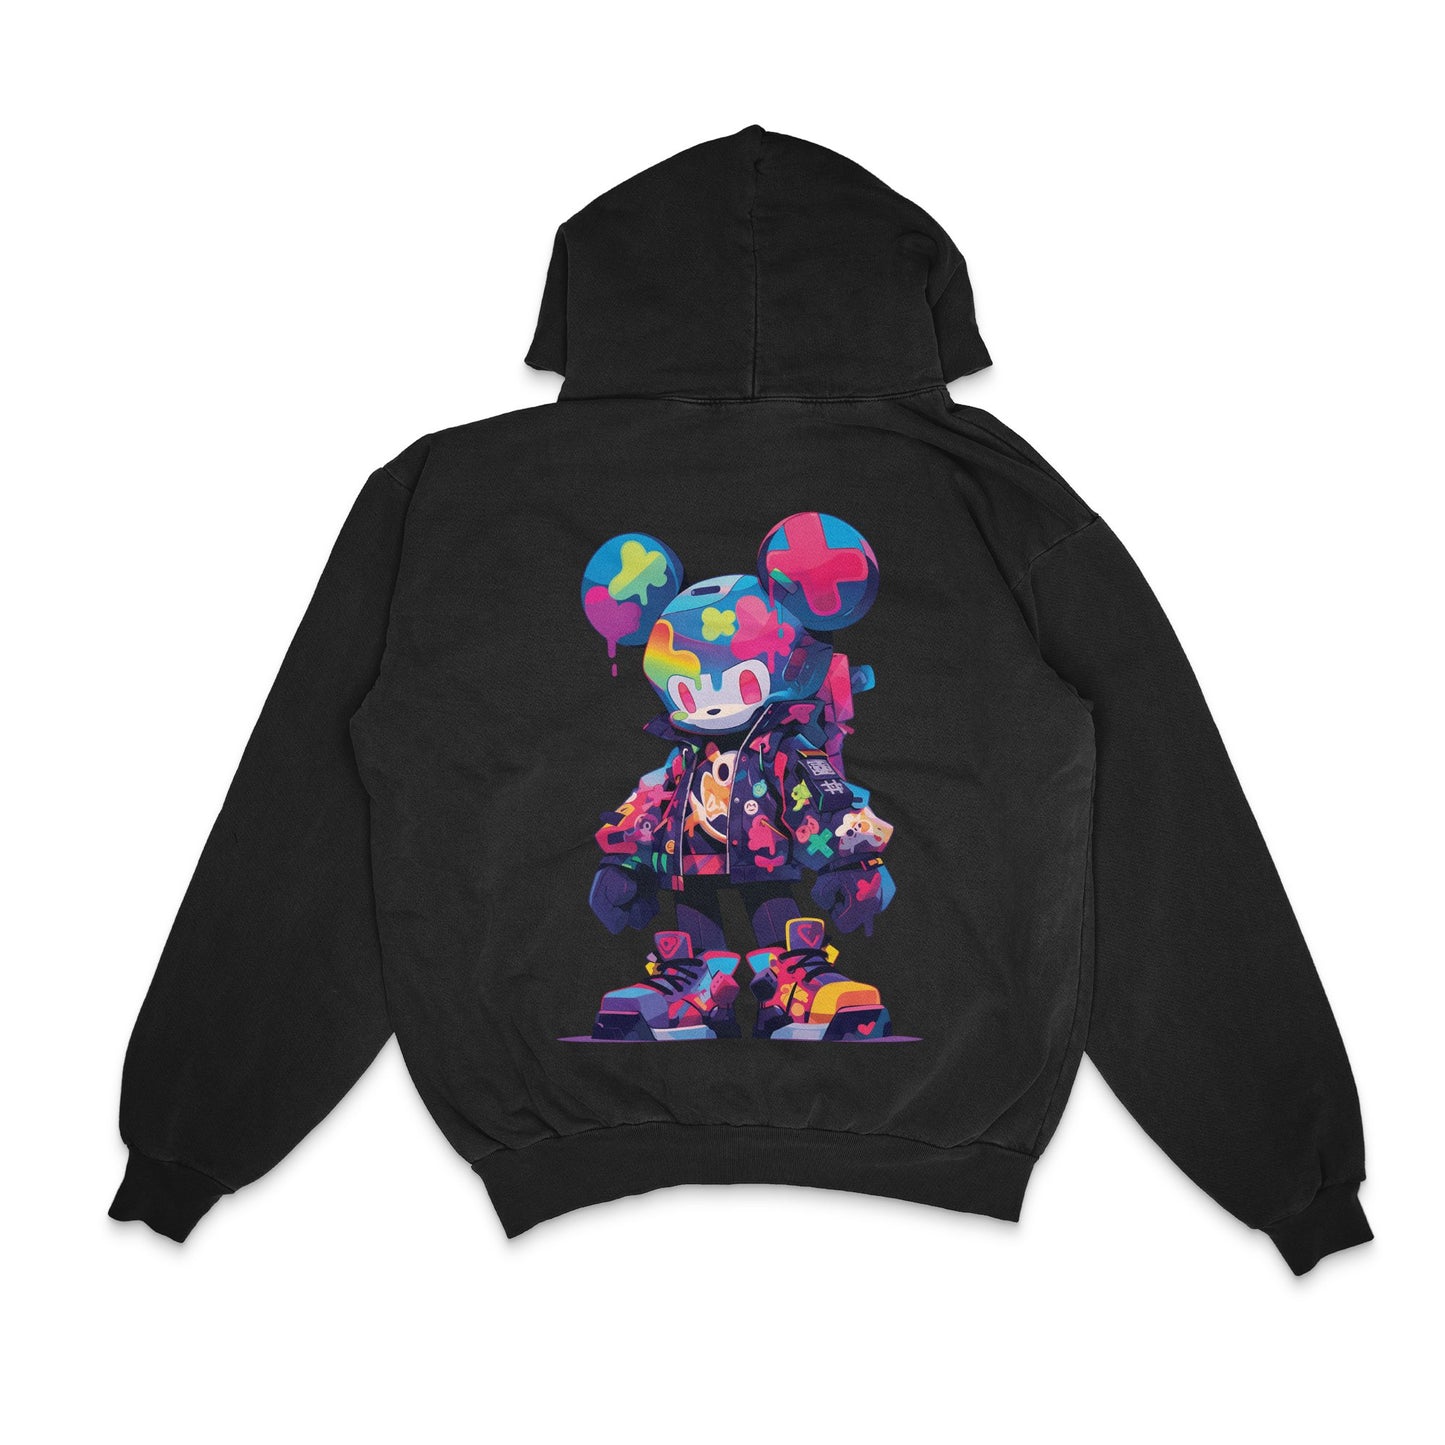 mickey-mouse-robot-character-in-colorful-jacket-vibrant-cartoon-art - Back